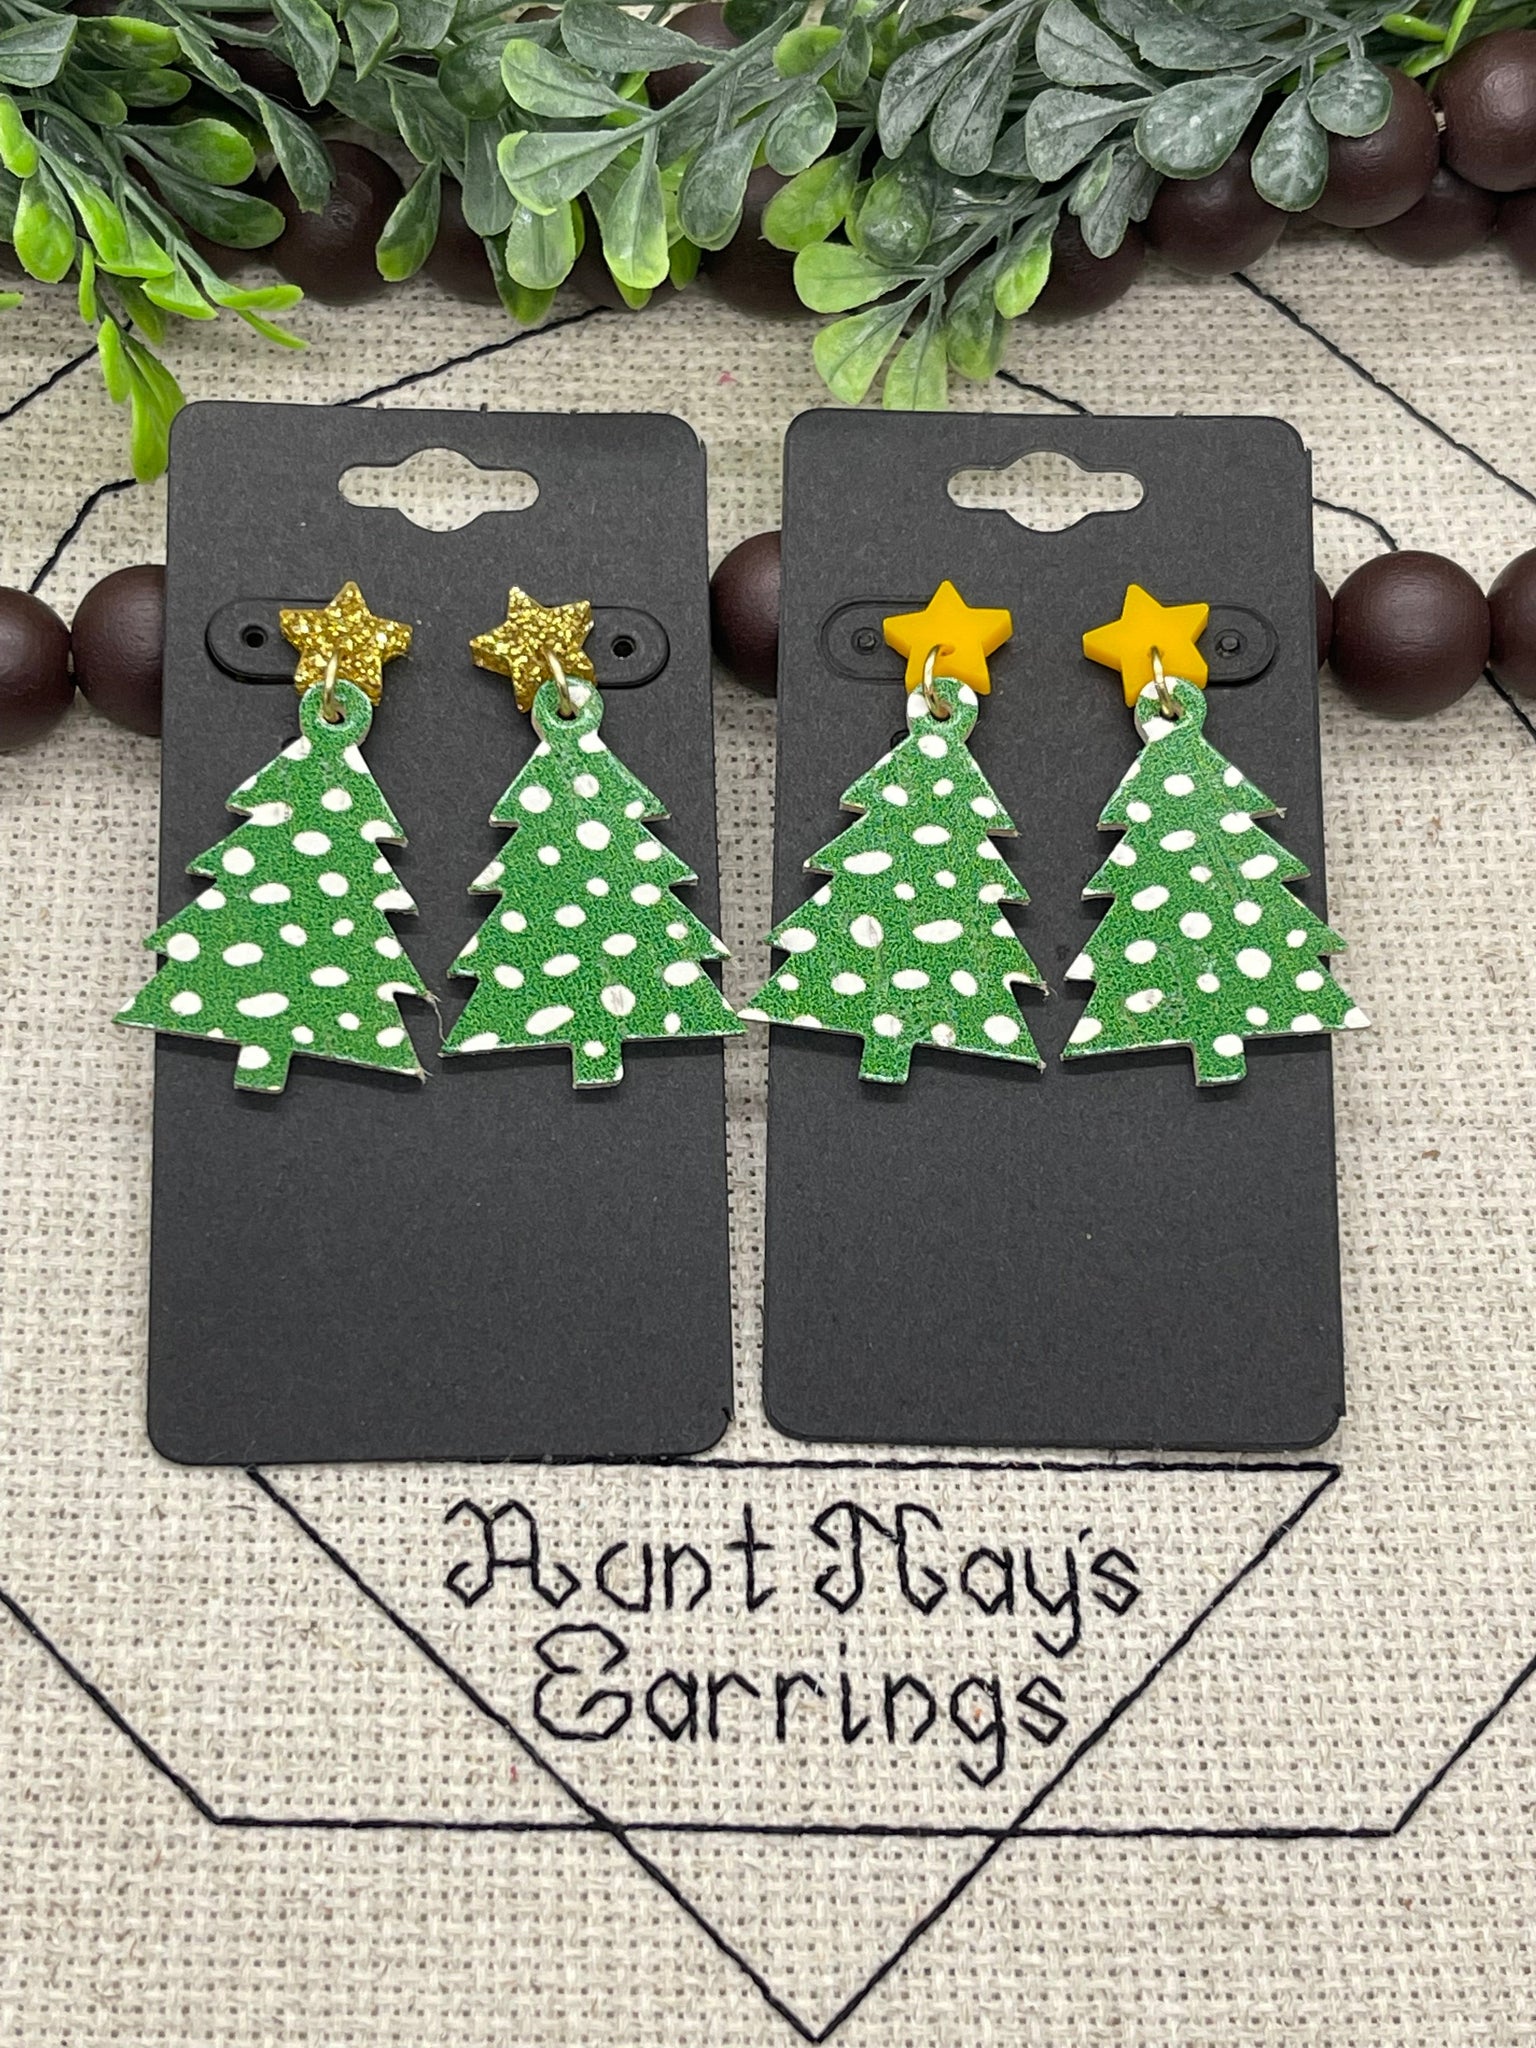 Green and White Dot Christmas Tree Shaped Cork on Leather Earrings with Star Topper